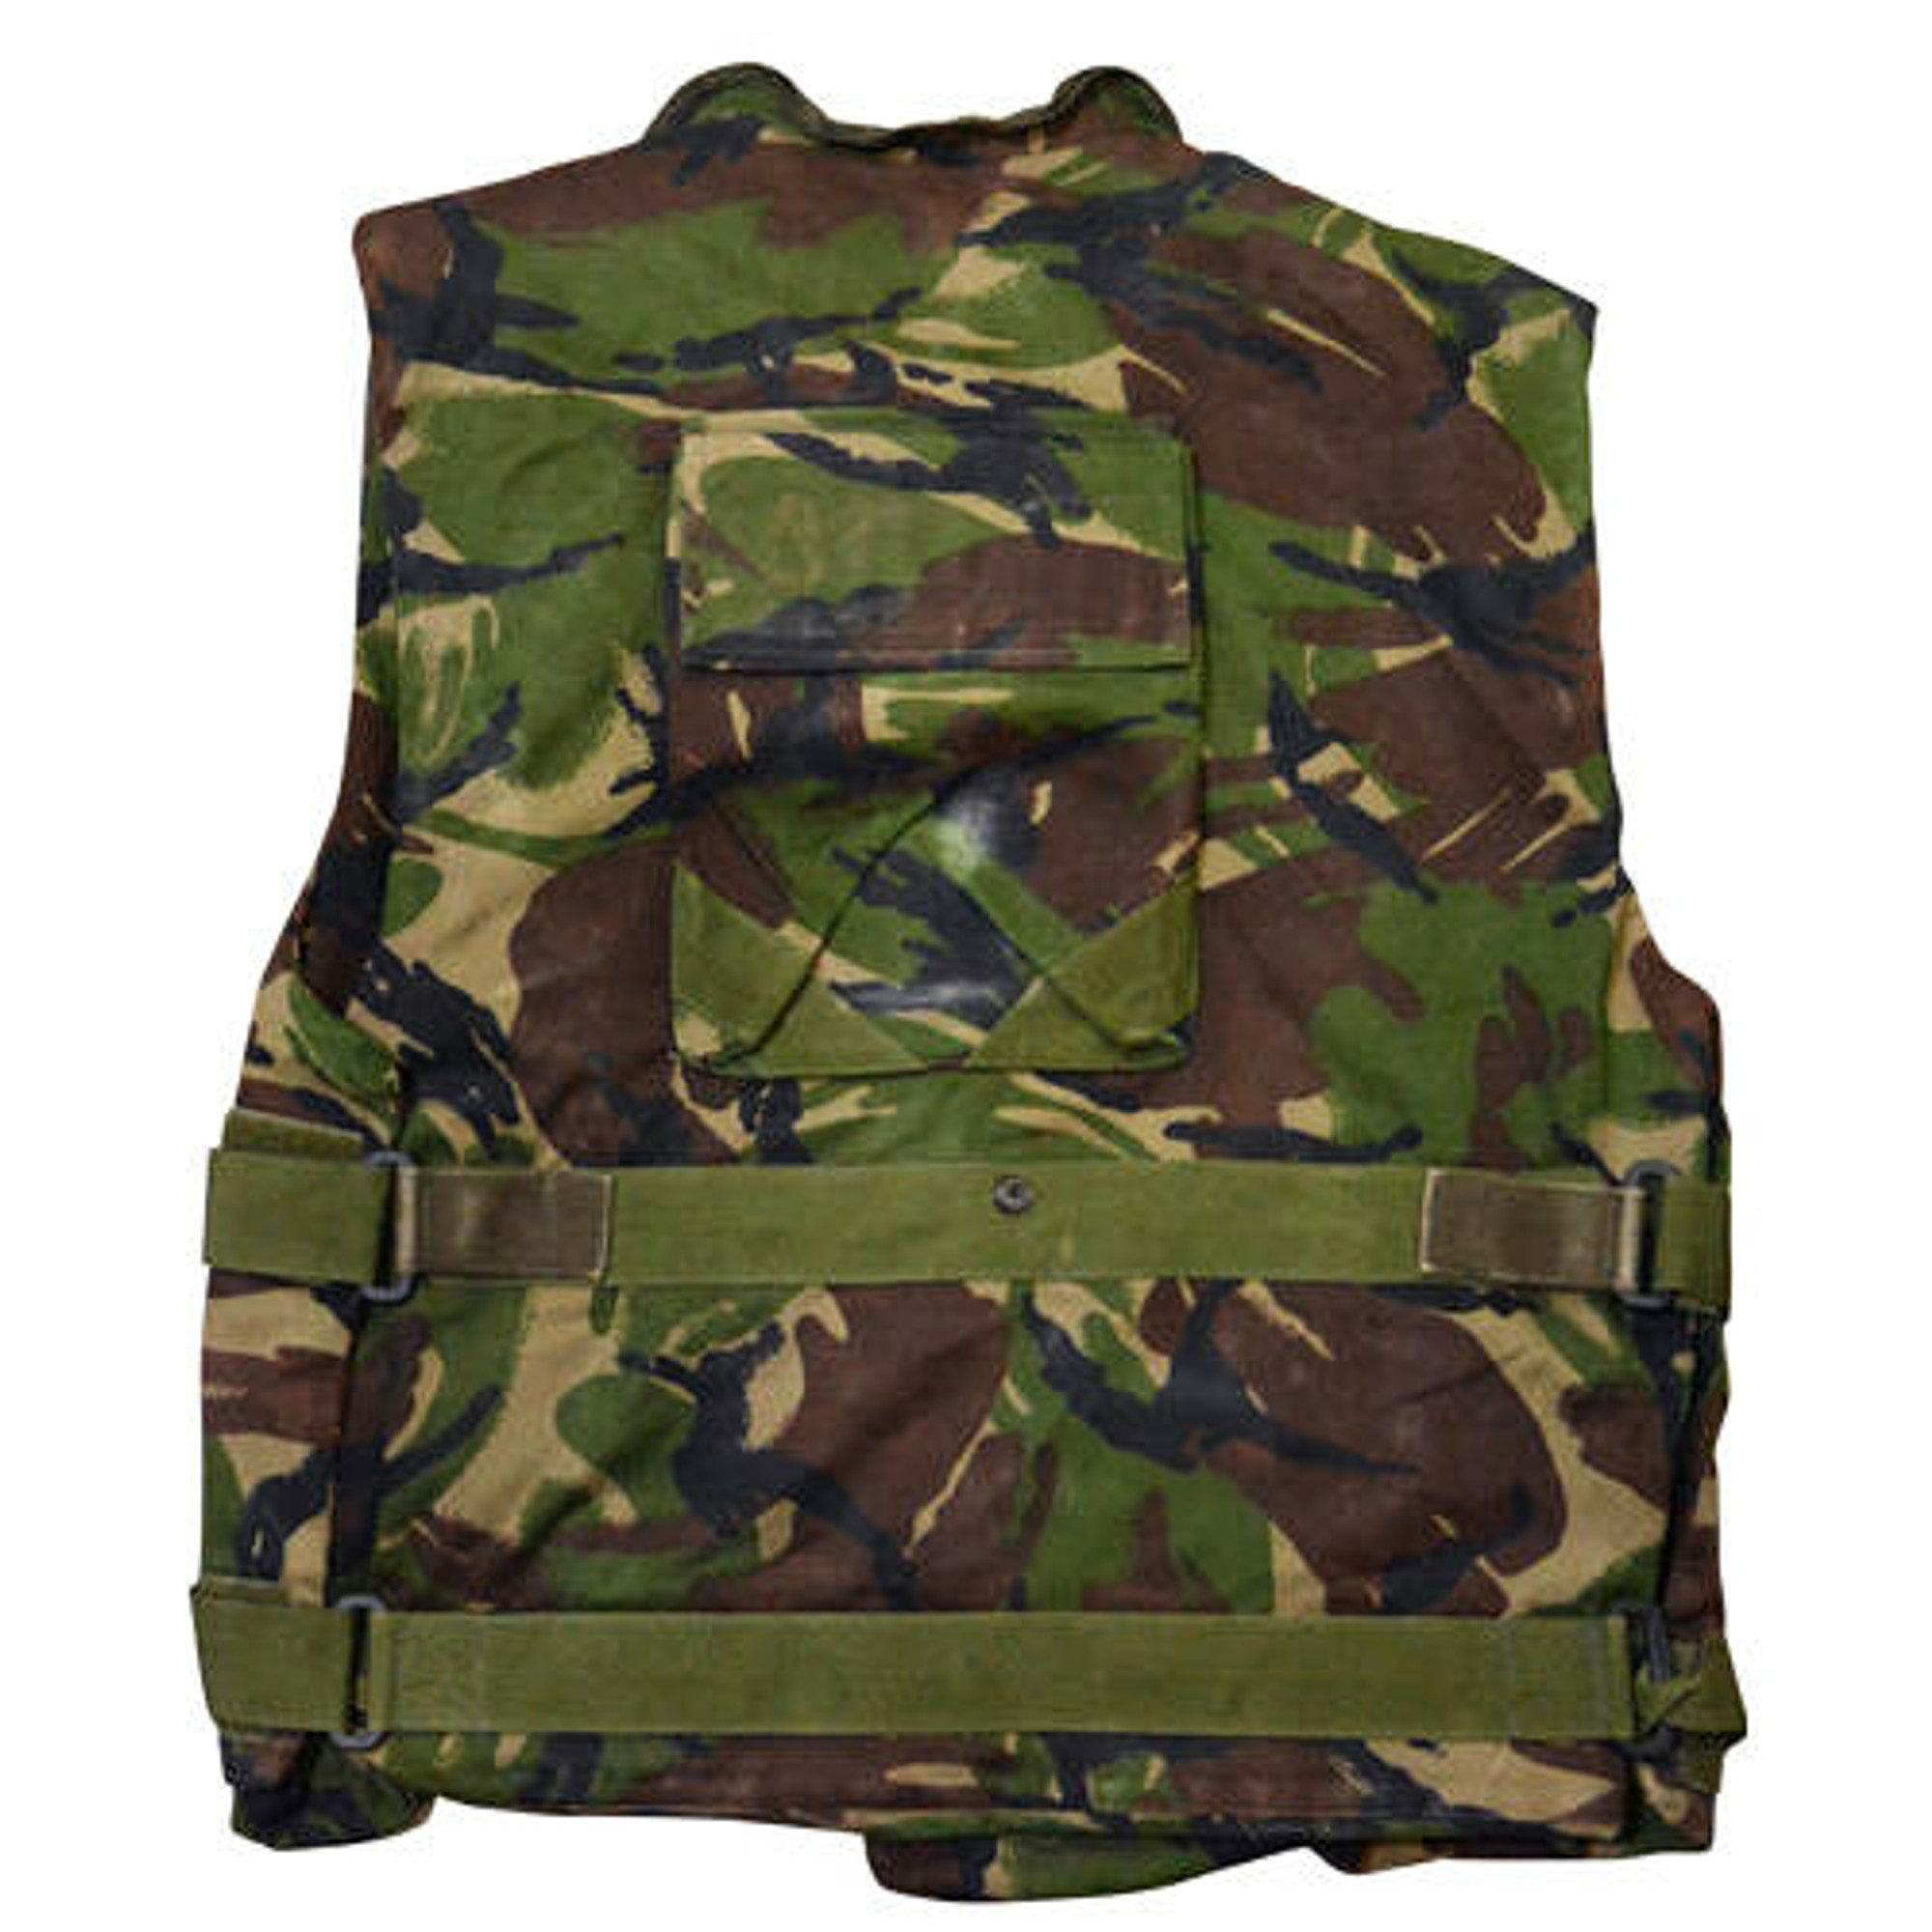 British Military Issue Anti-Fragmentation Cover Vest - Hero Outdoors